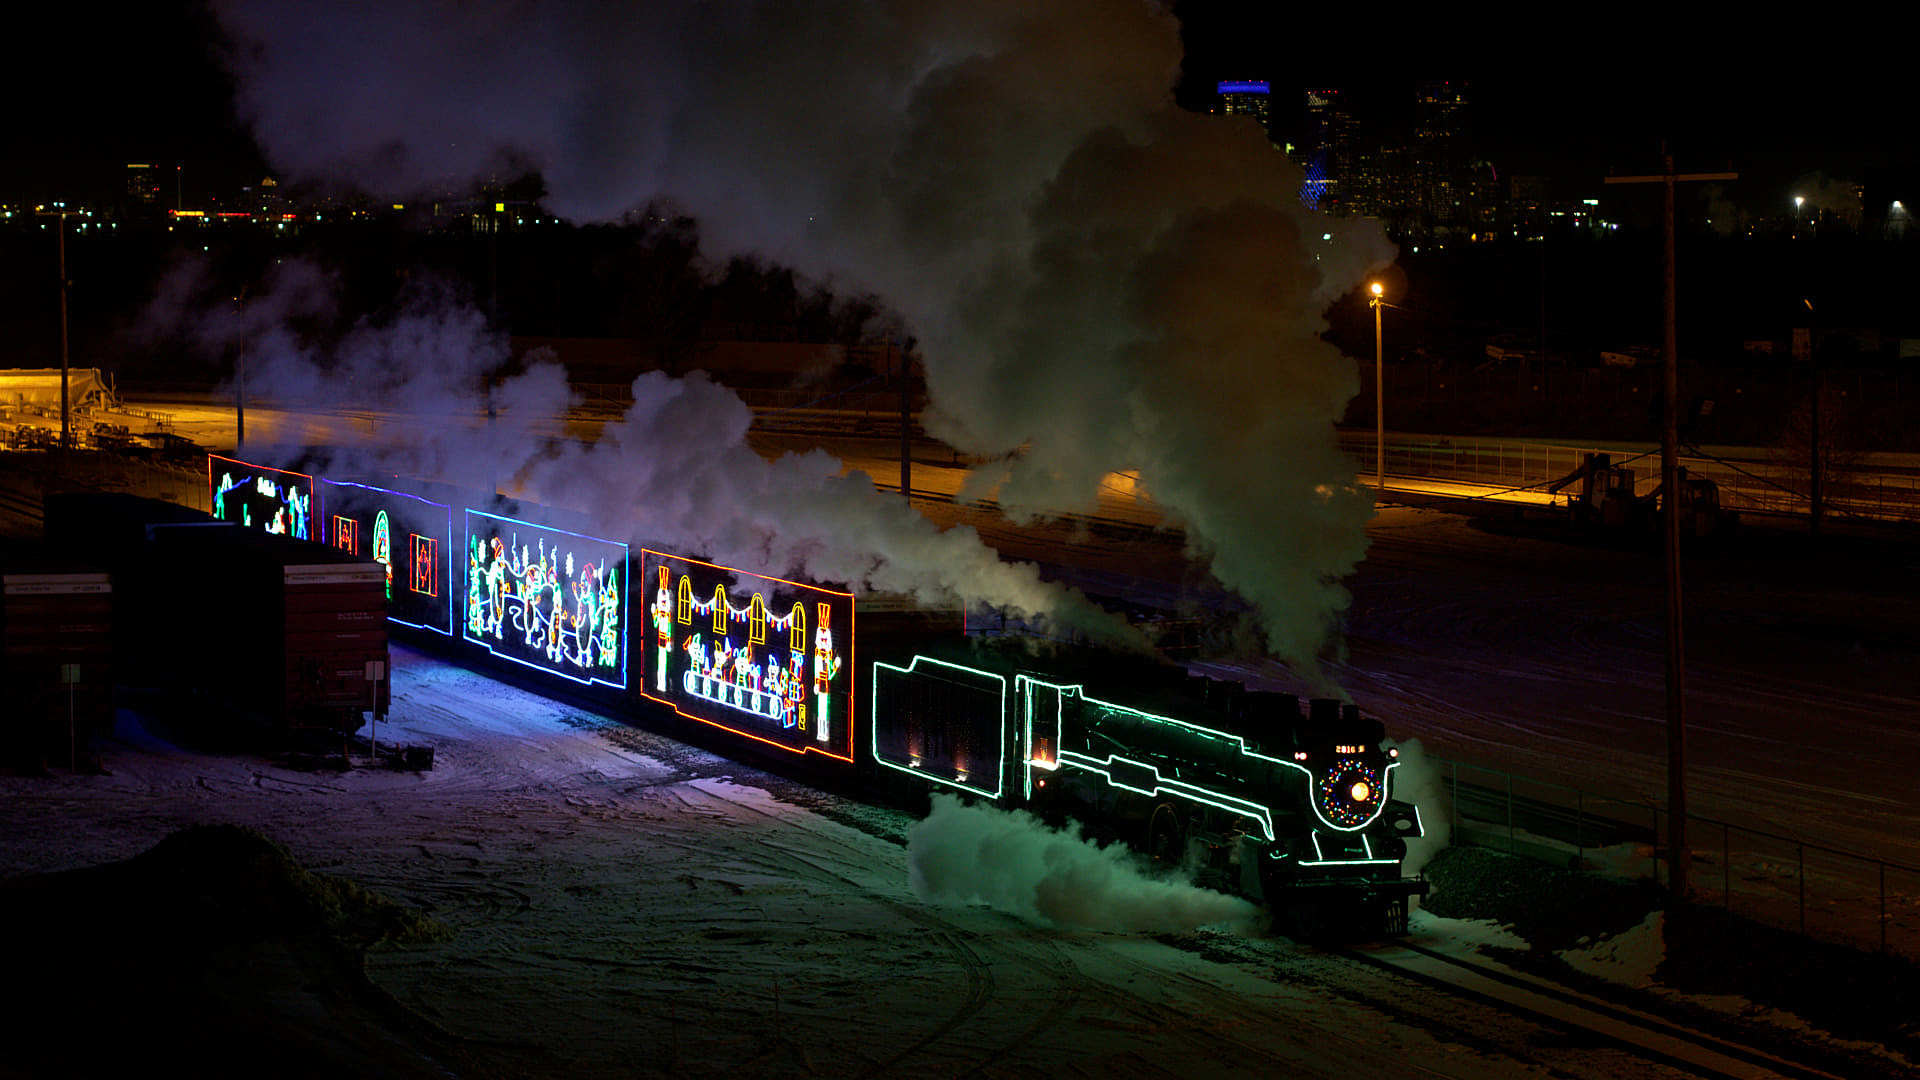 Canadian Pacific Holiday Train Brings Wonder And Delight to Oneonta, NY